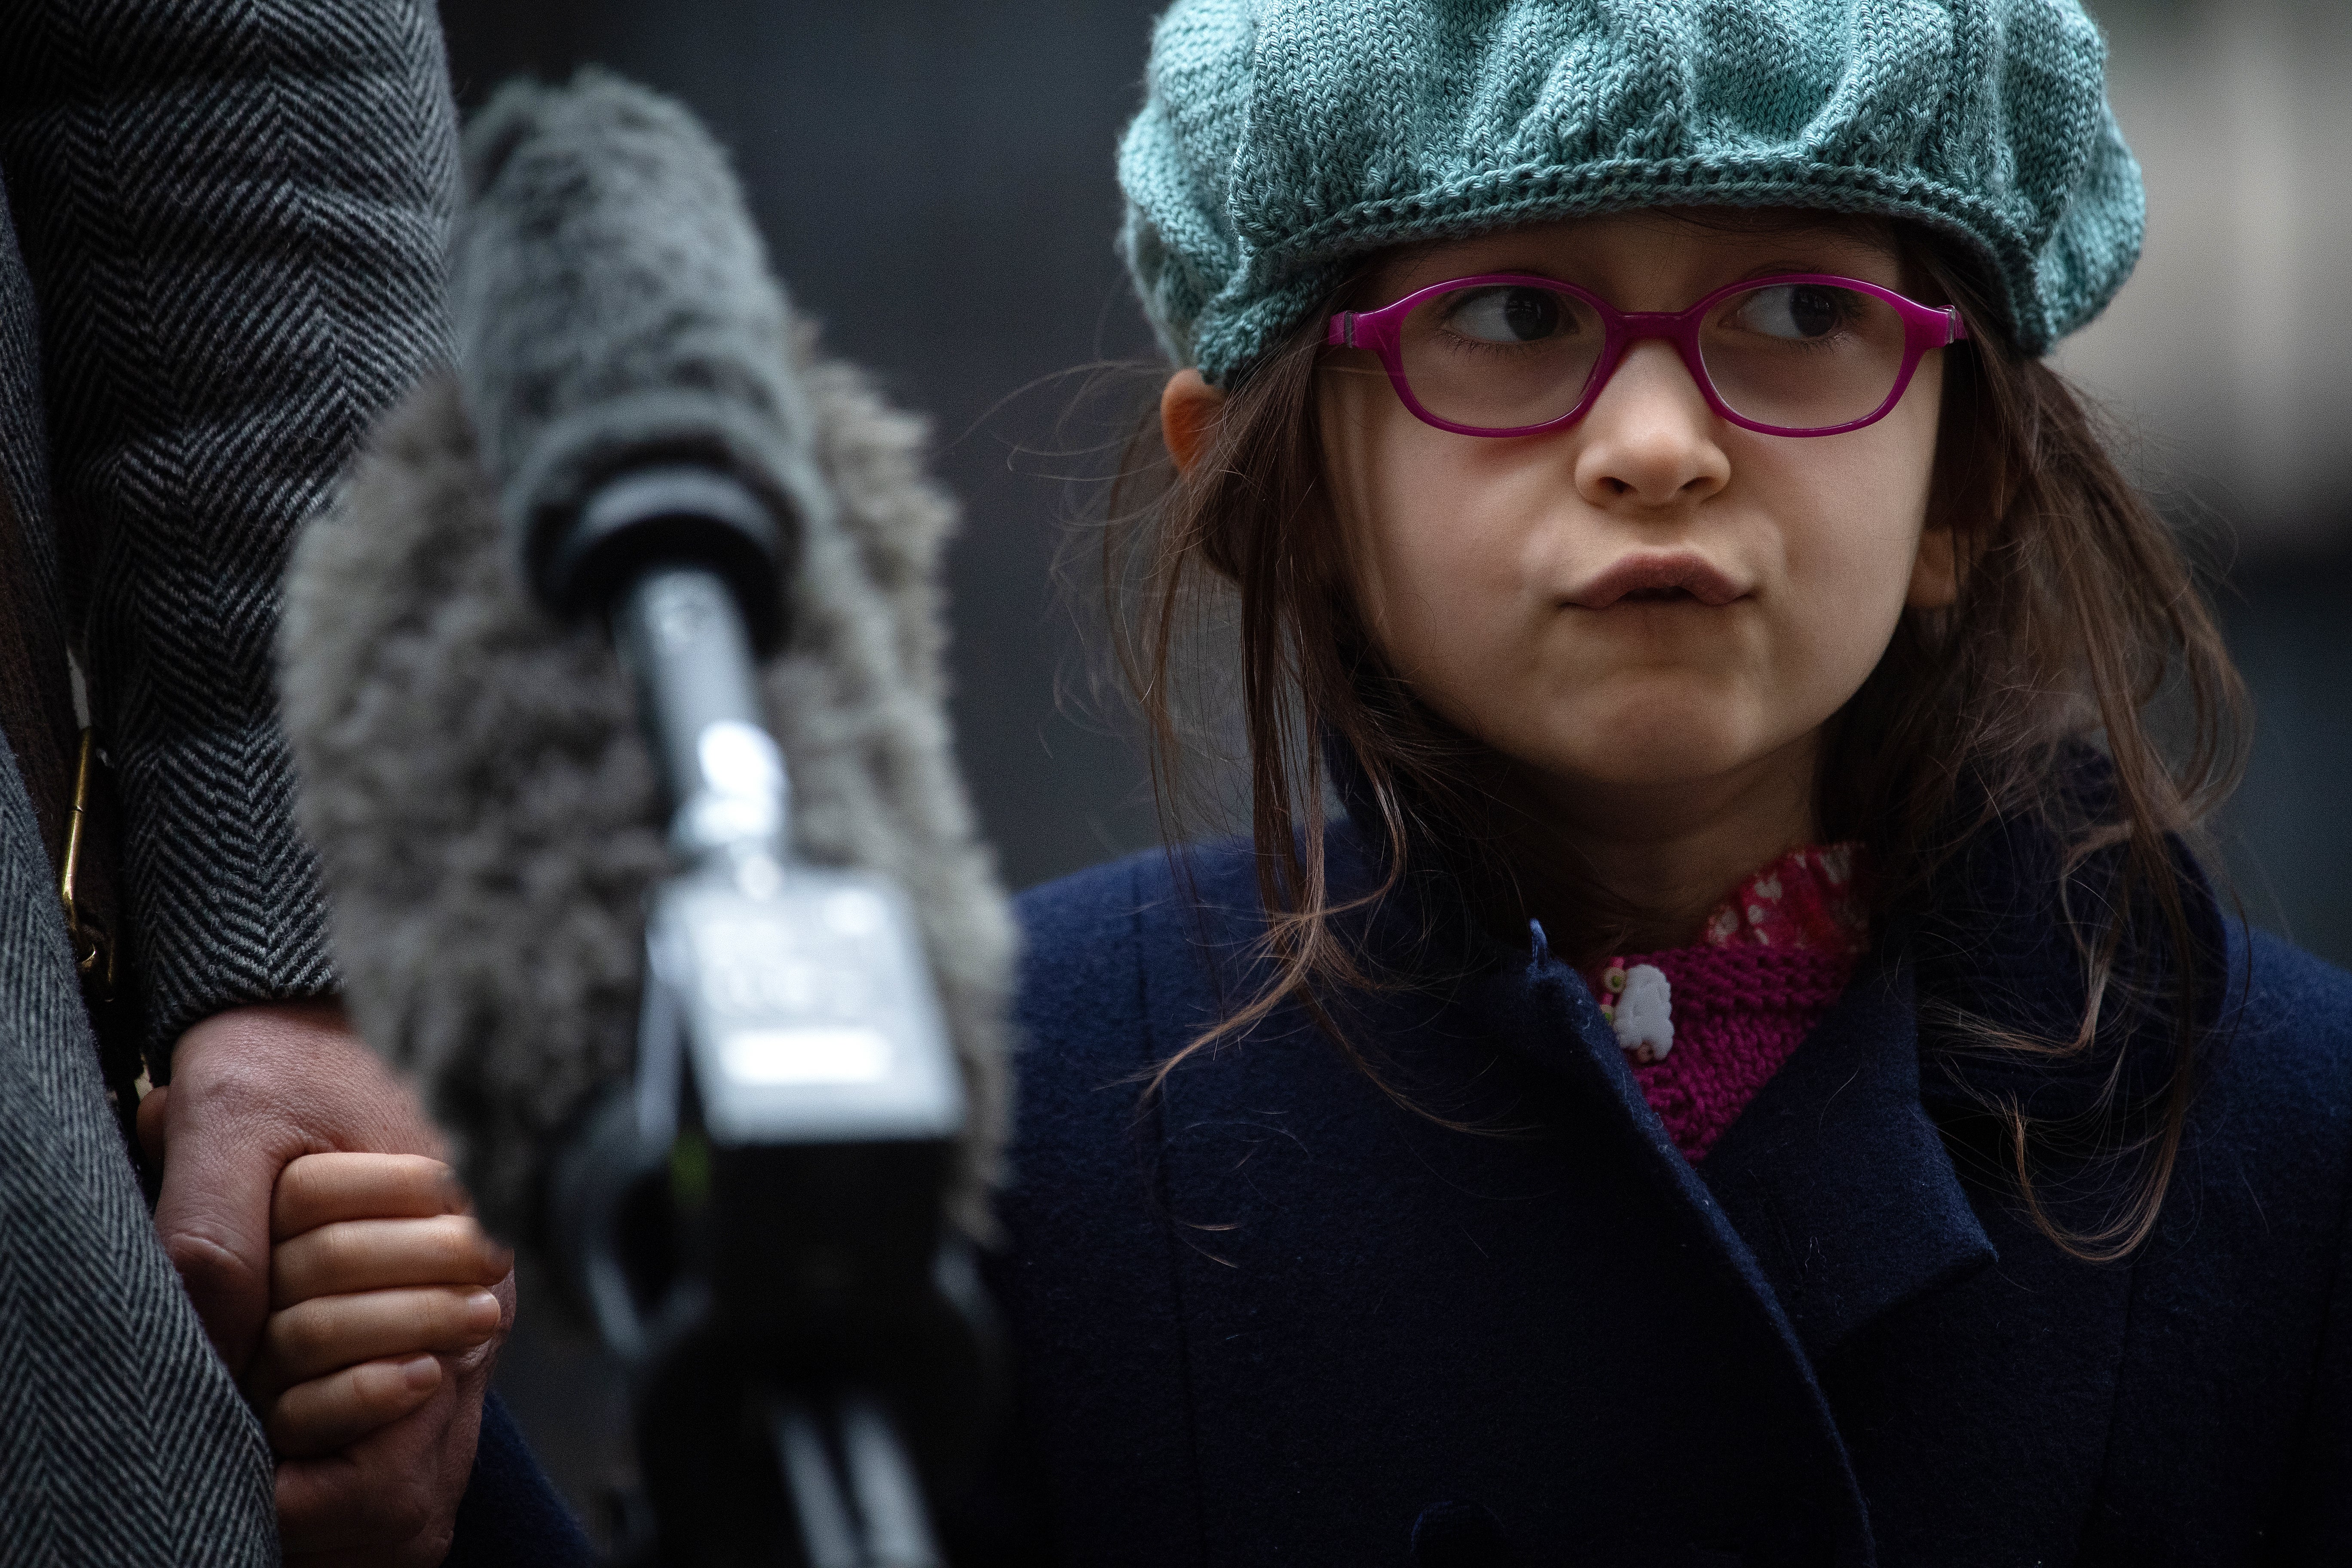 Gabriella Ratcliffe, the daughter of Nazanin Zaghari-Ratcliffe, listens to a question from the media during a visit in Downing Street on 23 January 2020.